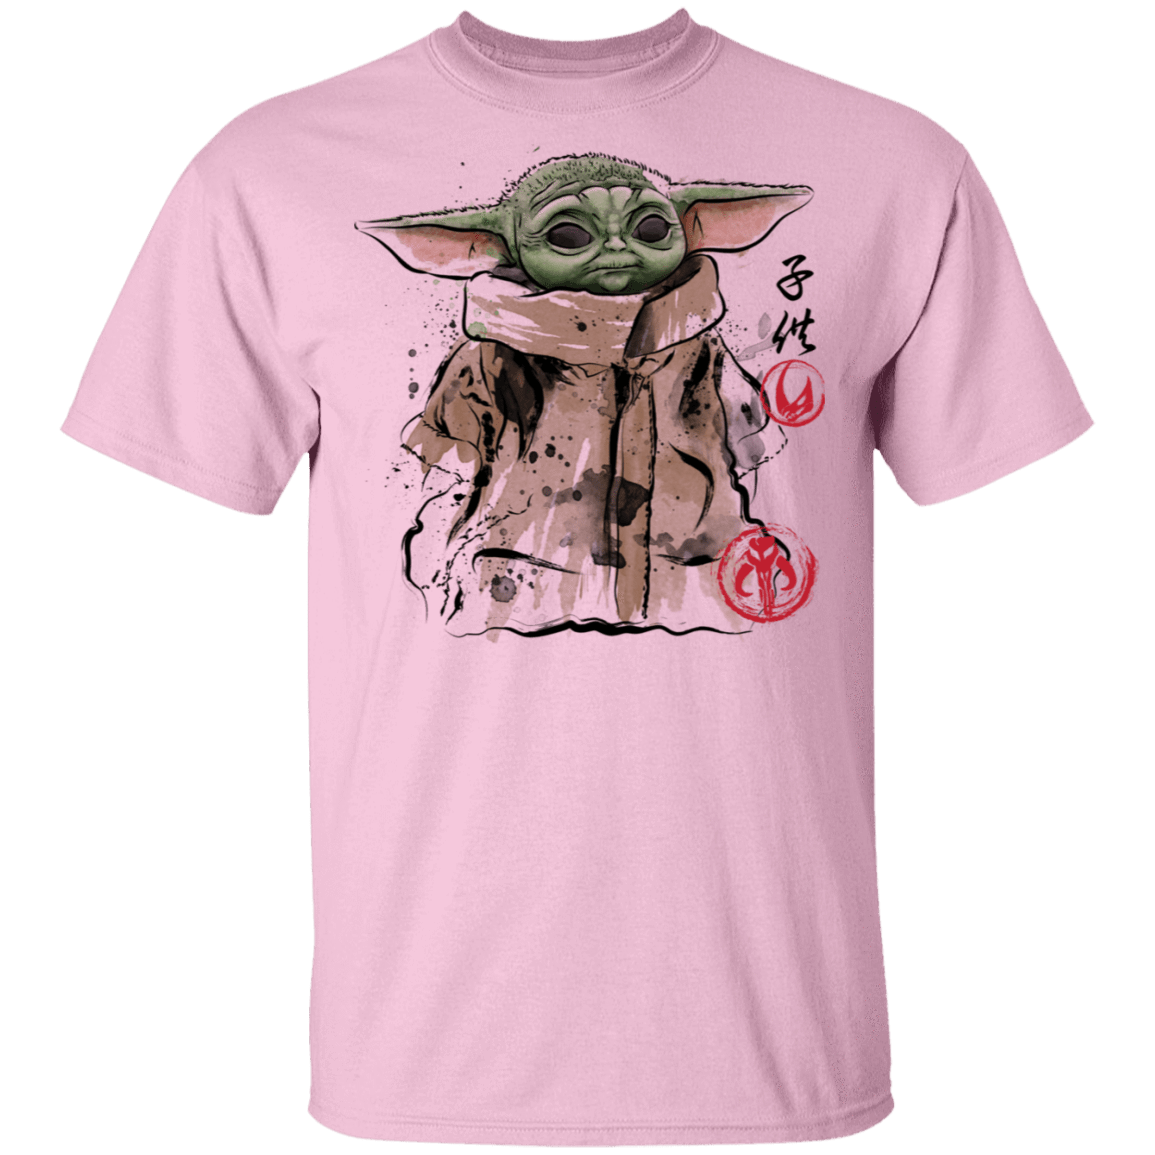 T-Shirts Light Pink / S Clan of Two The Child T-Shirt